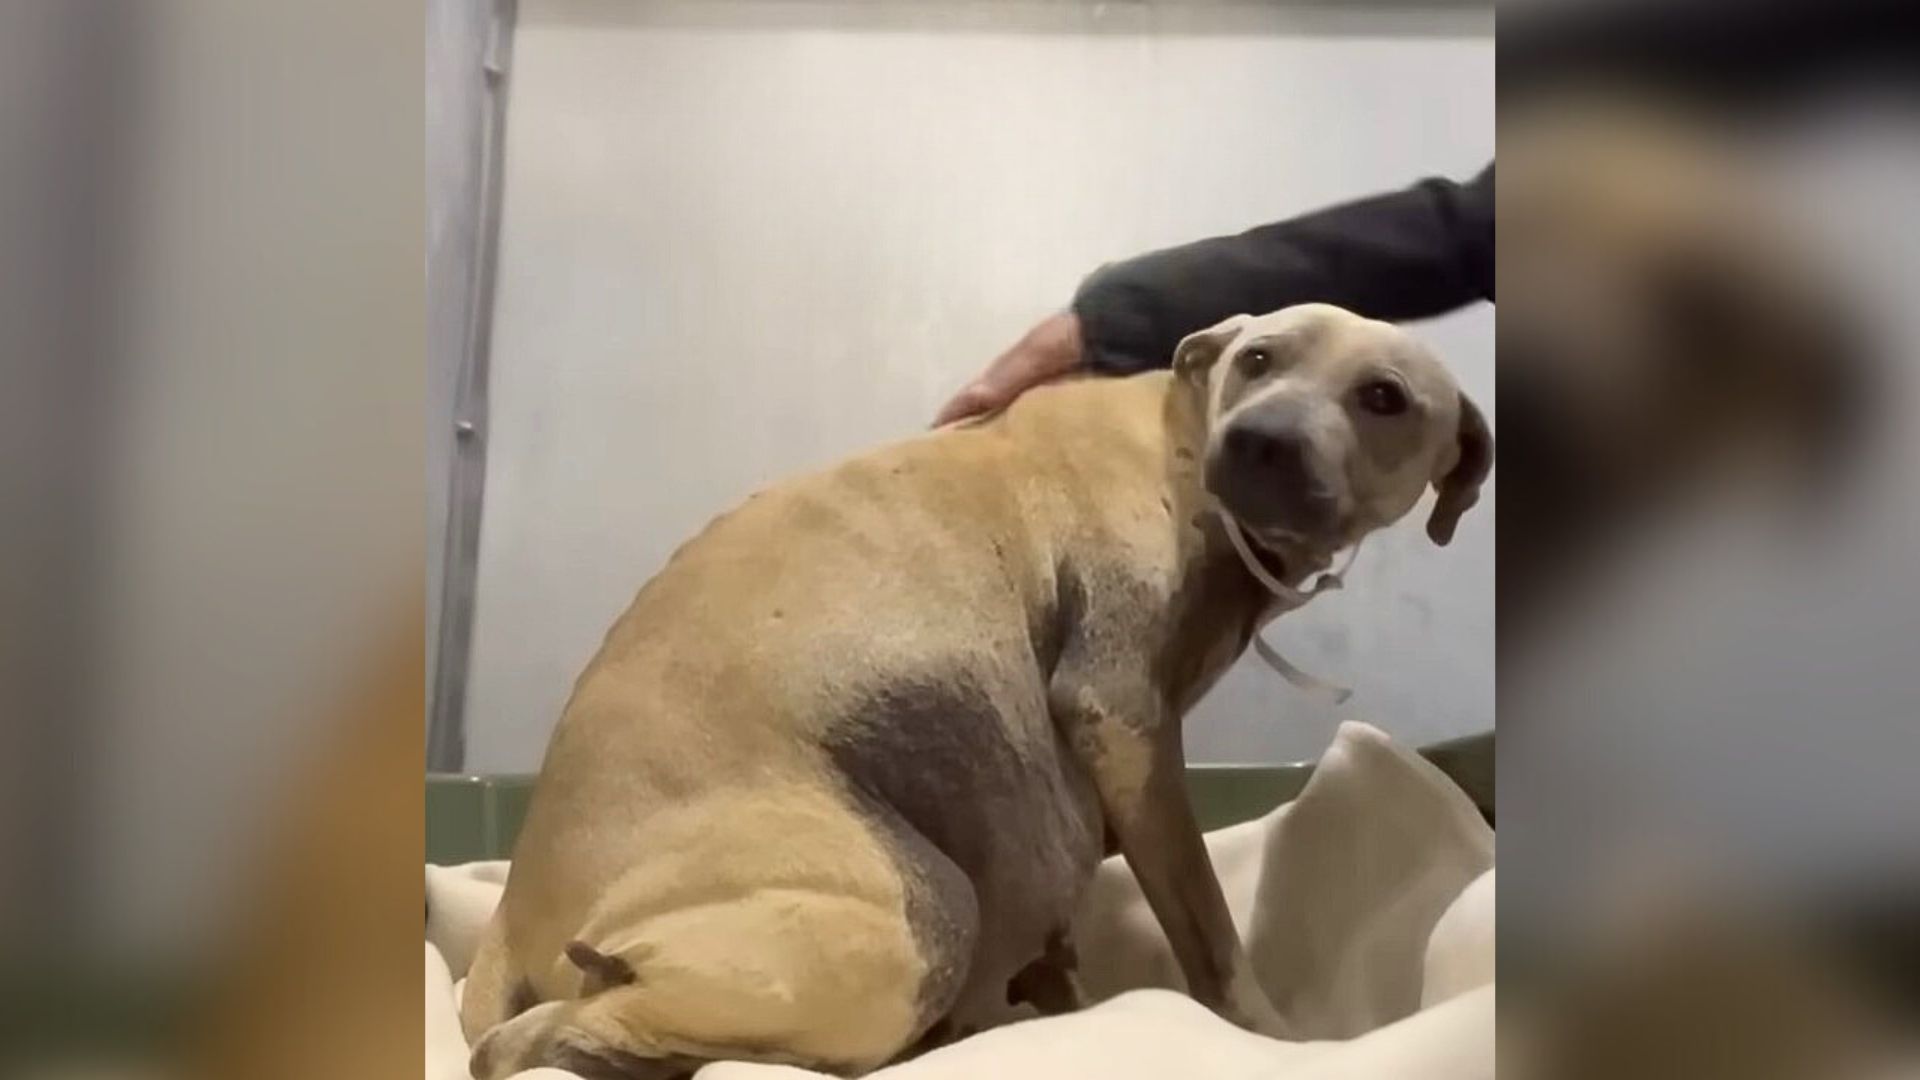 Heavily Pregnant Dog Dumped At Shelter Only A Few Days Before Giving Birth